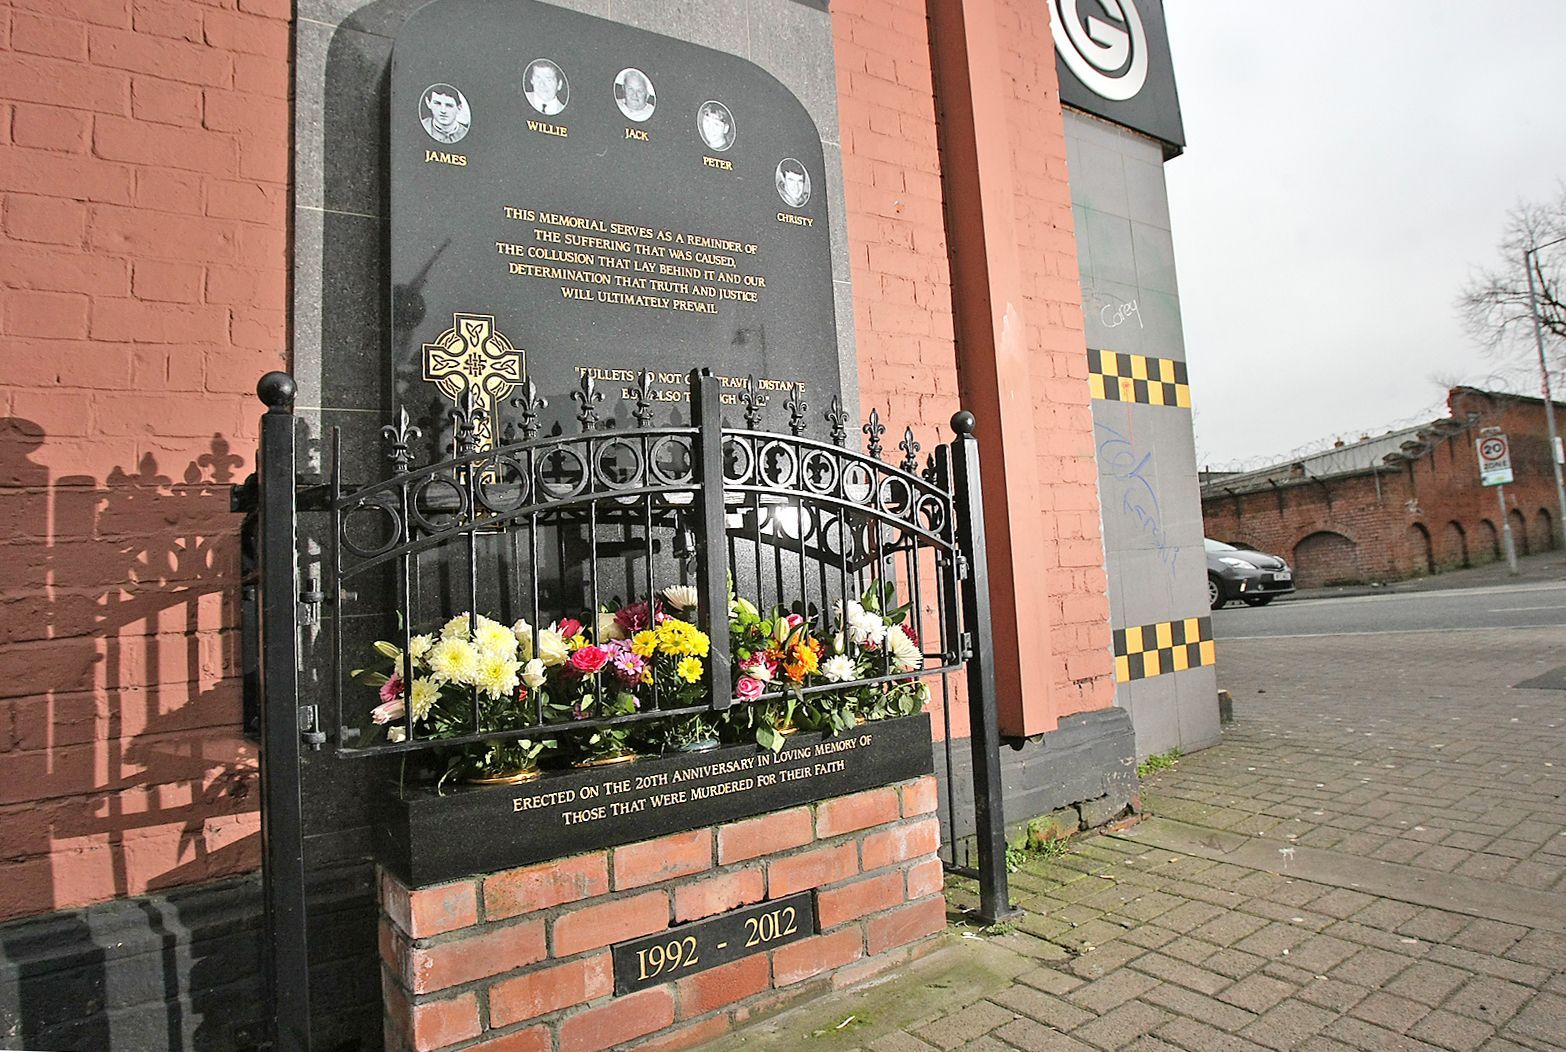 RECENT HISTORY: Lower Ormeau has experienced more than its fair share of heartache, like the 1992 Sean Grahams massacre